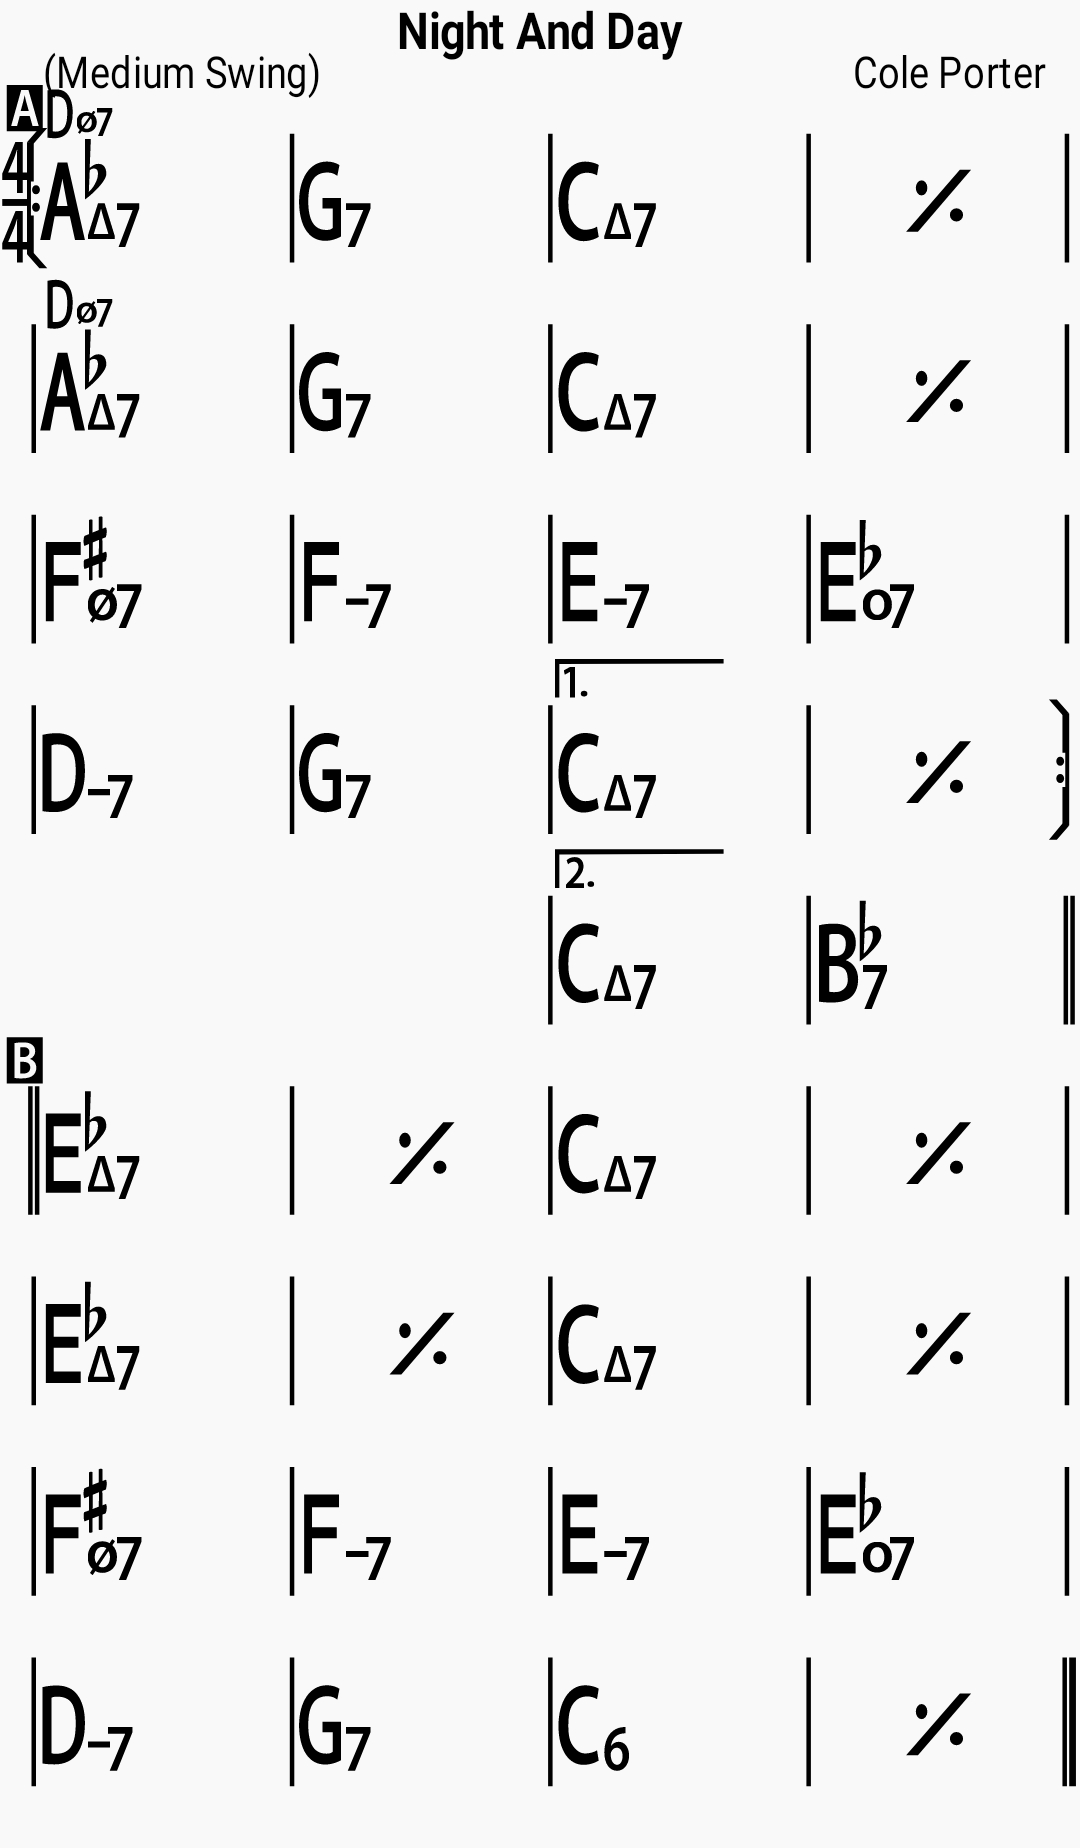 Chord chart for the jazz standard Night And Day